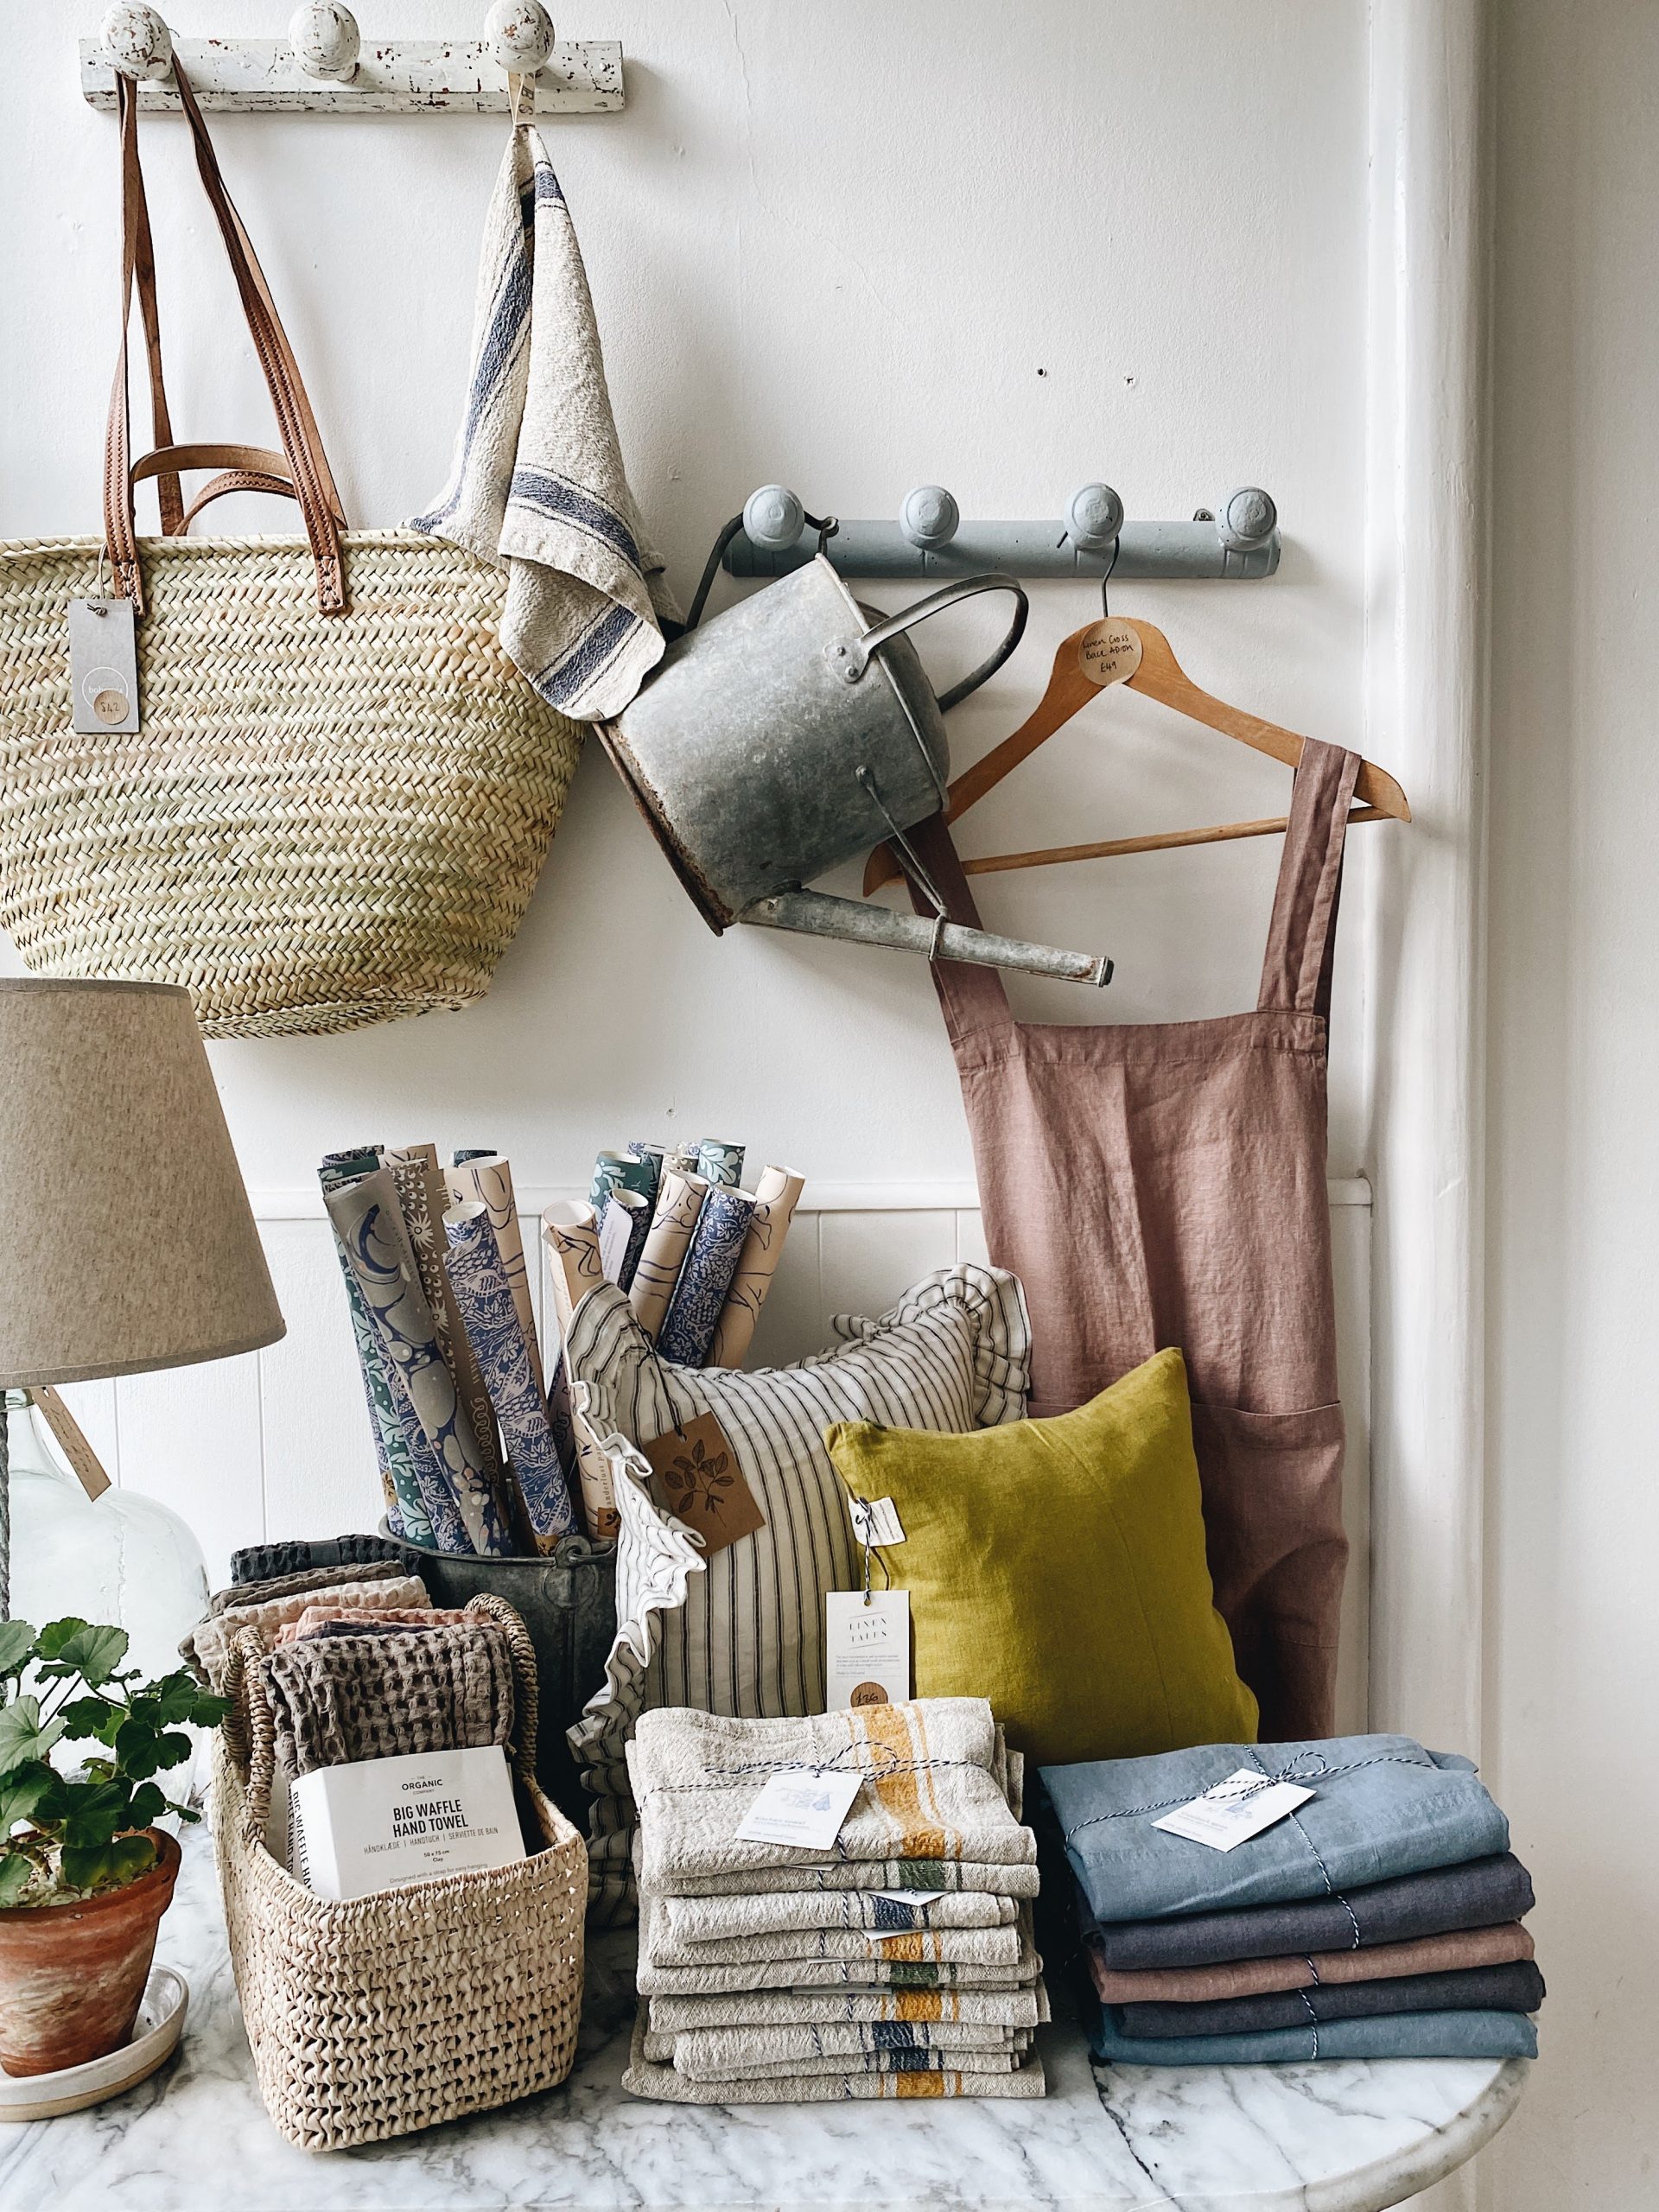 Linen dungarees and more inside The Botanical Candle Co. in Shaftesbury, Dorset